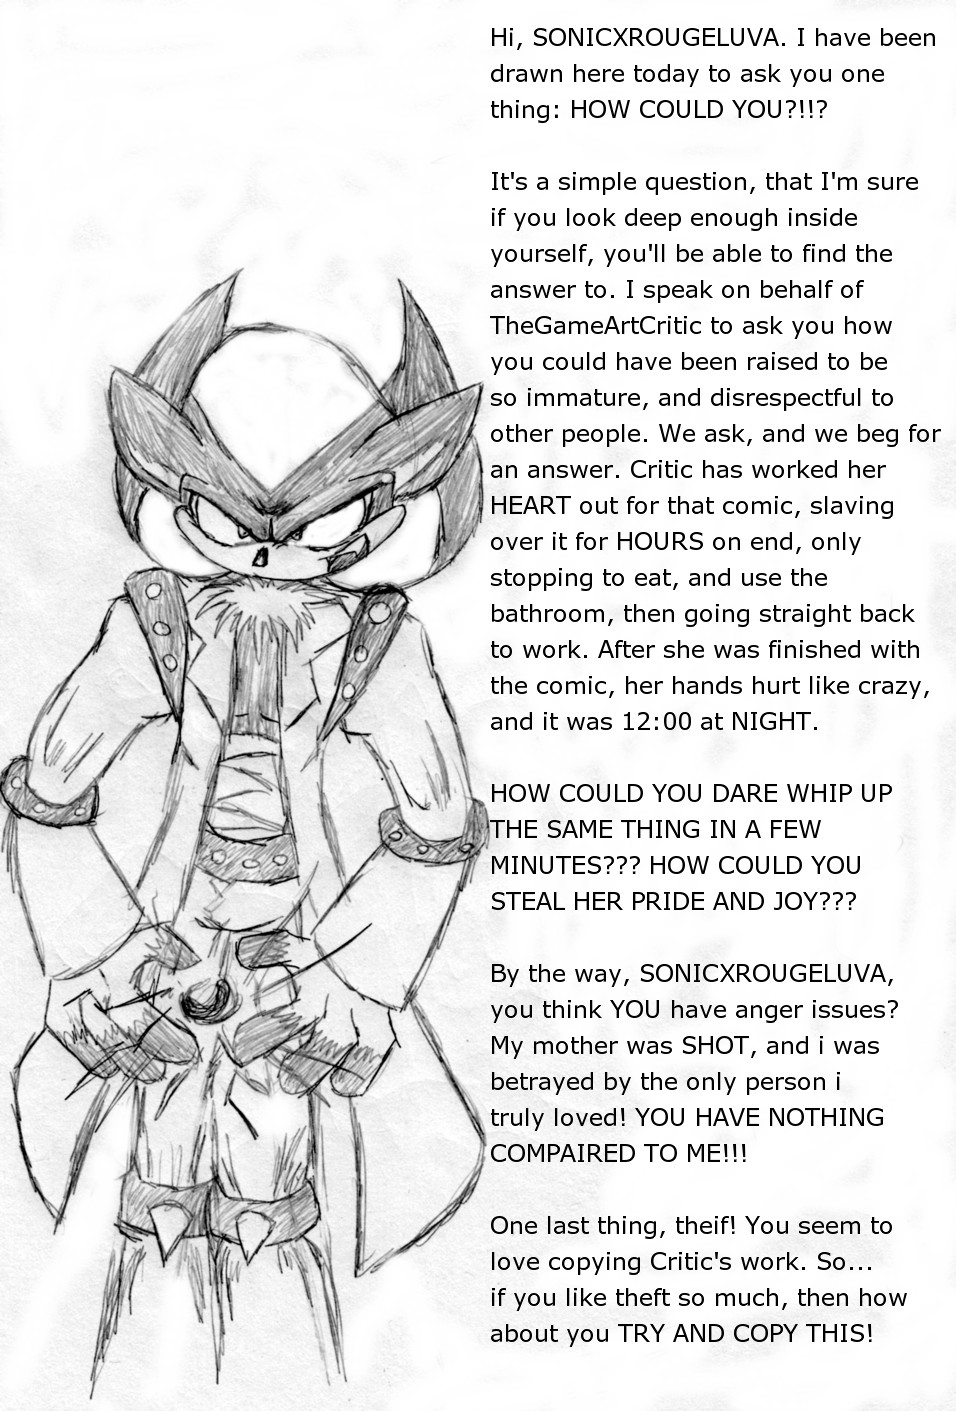 A Message for SONICXROUGELUVA (gift for SONICXROUGELUVA) by TheGameArtCritic